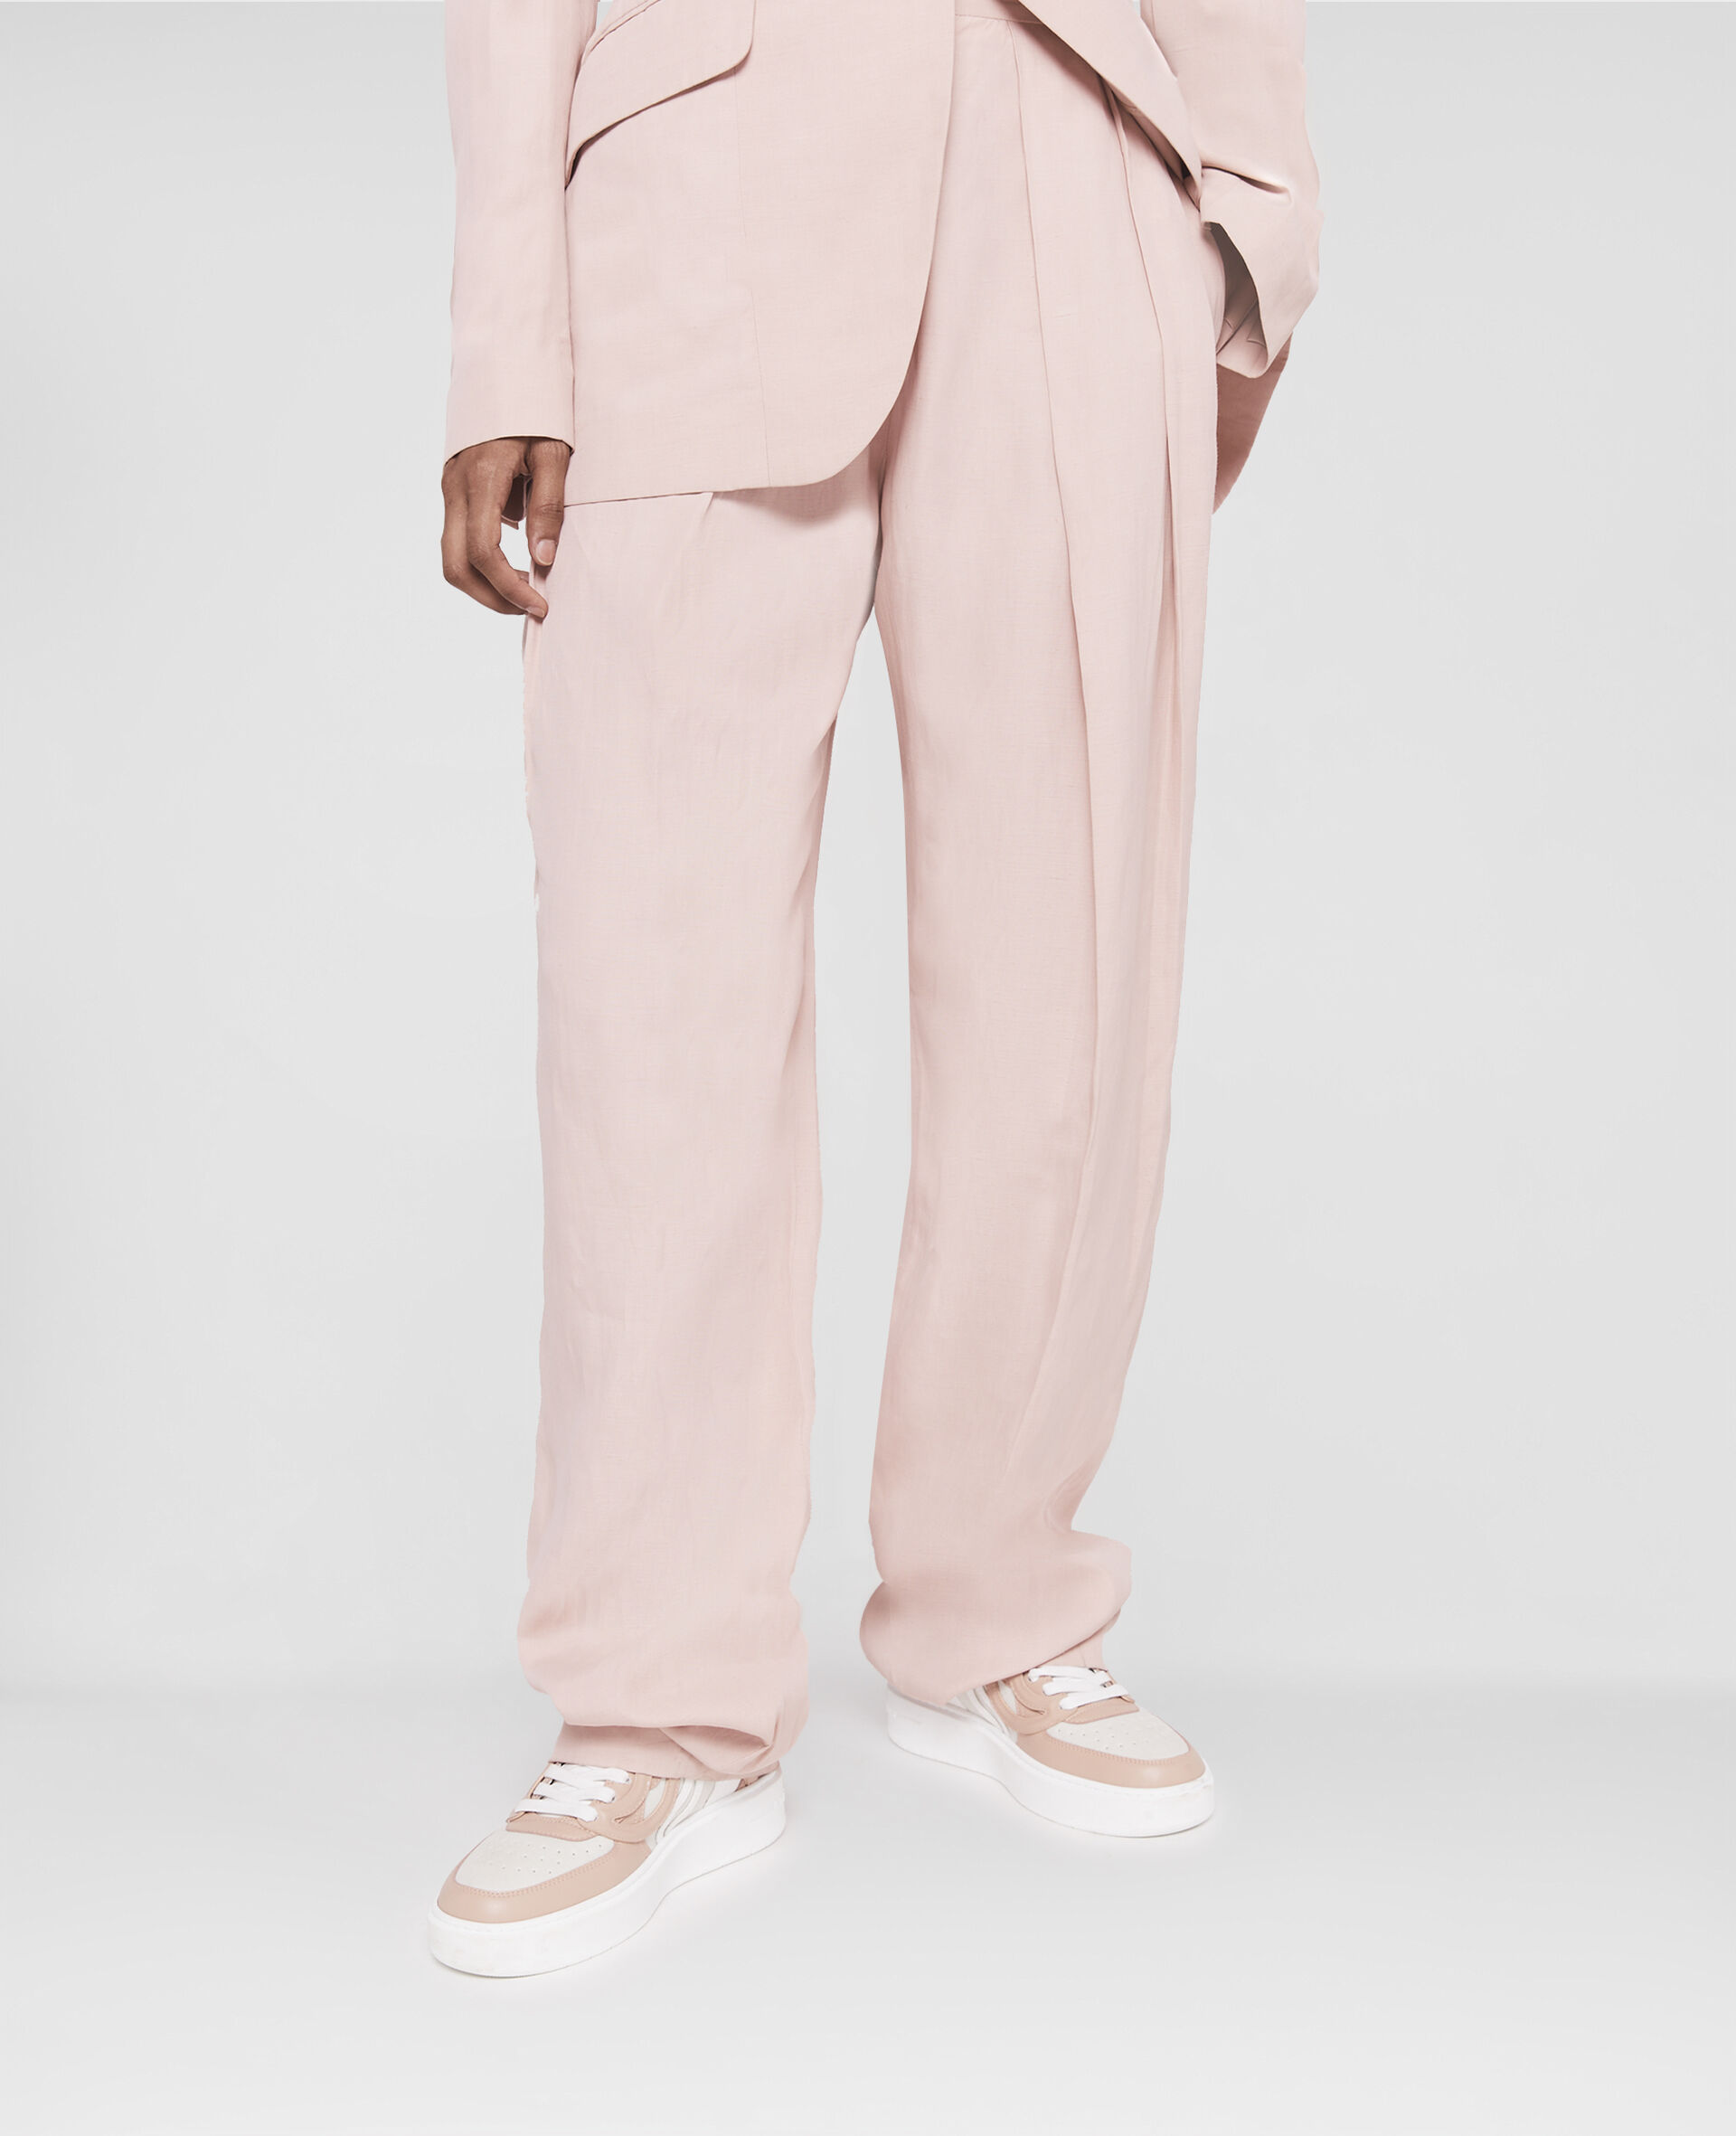 Fluid Linen Pleat Front Straight Leg Trousers-Pink-large image number 3